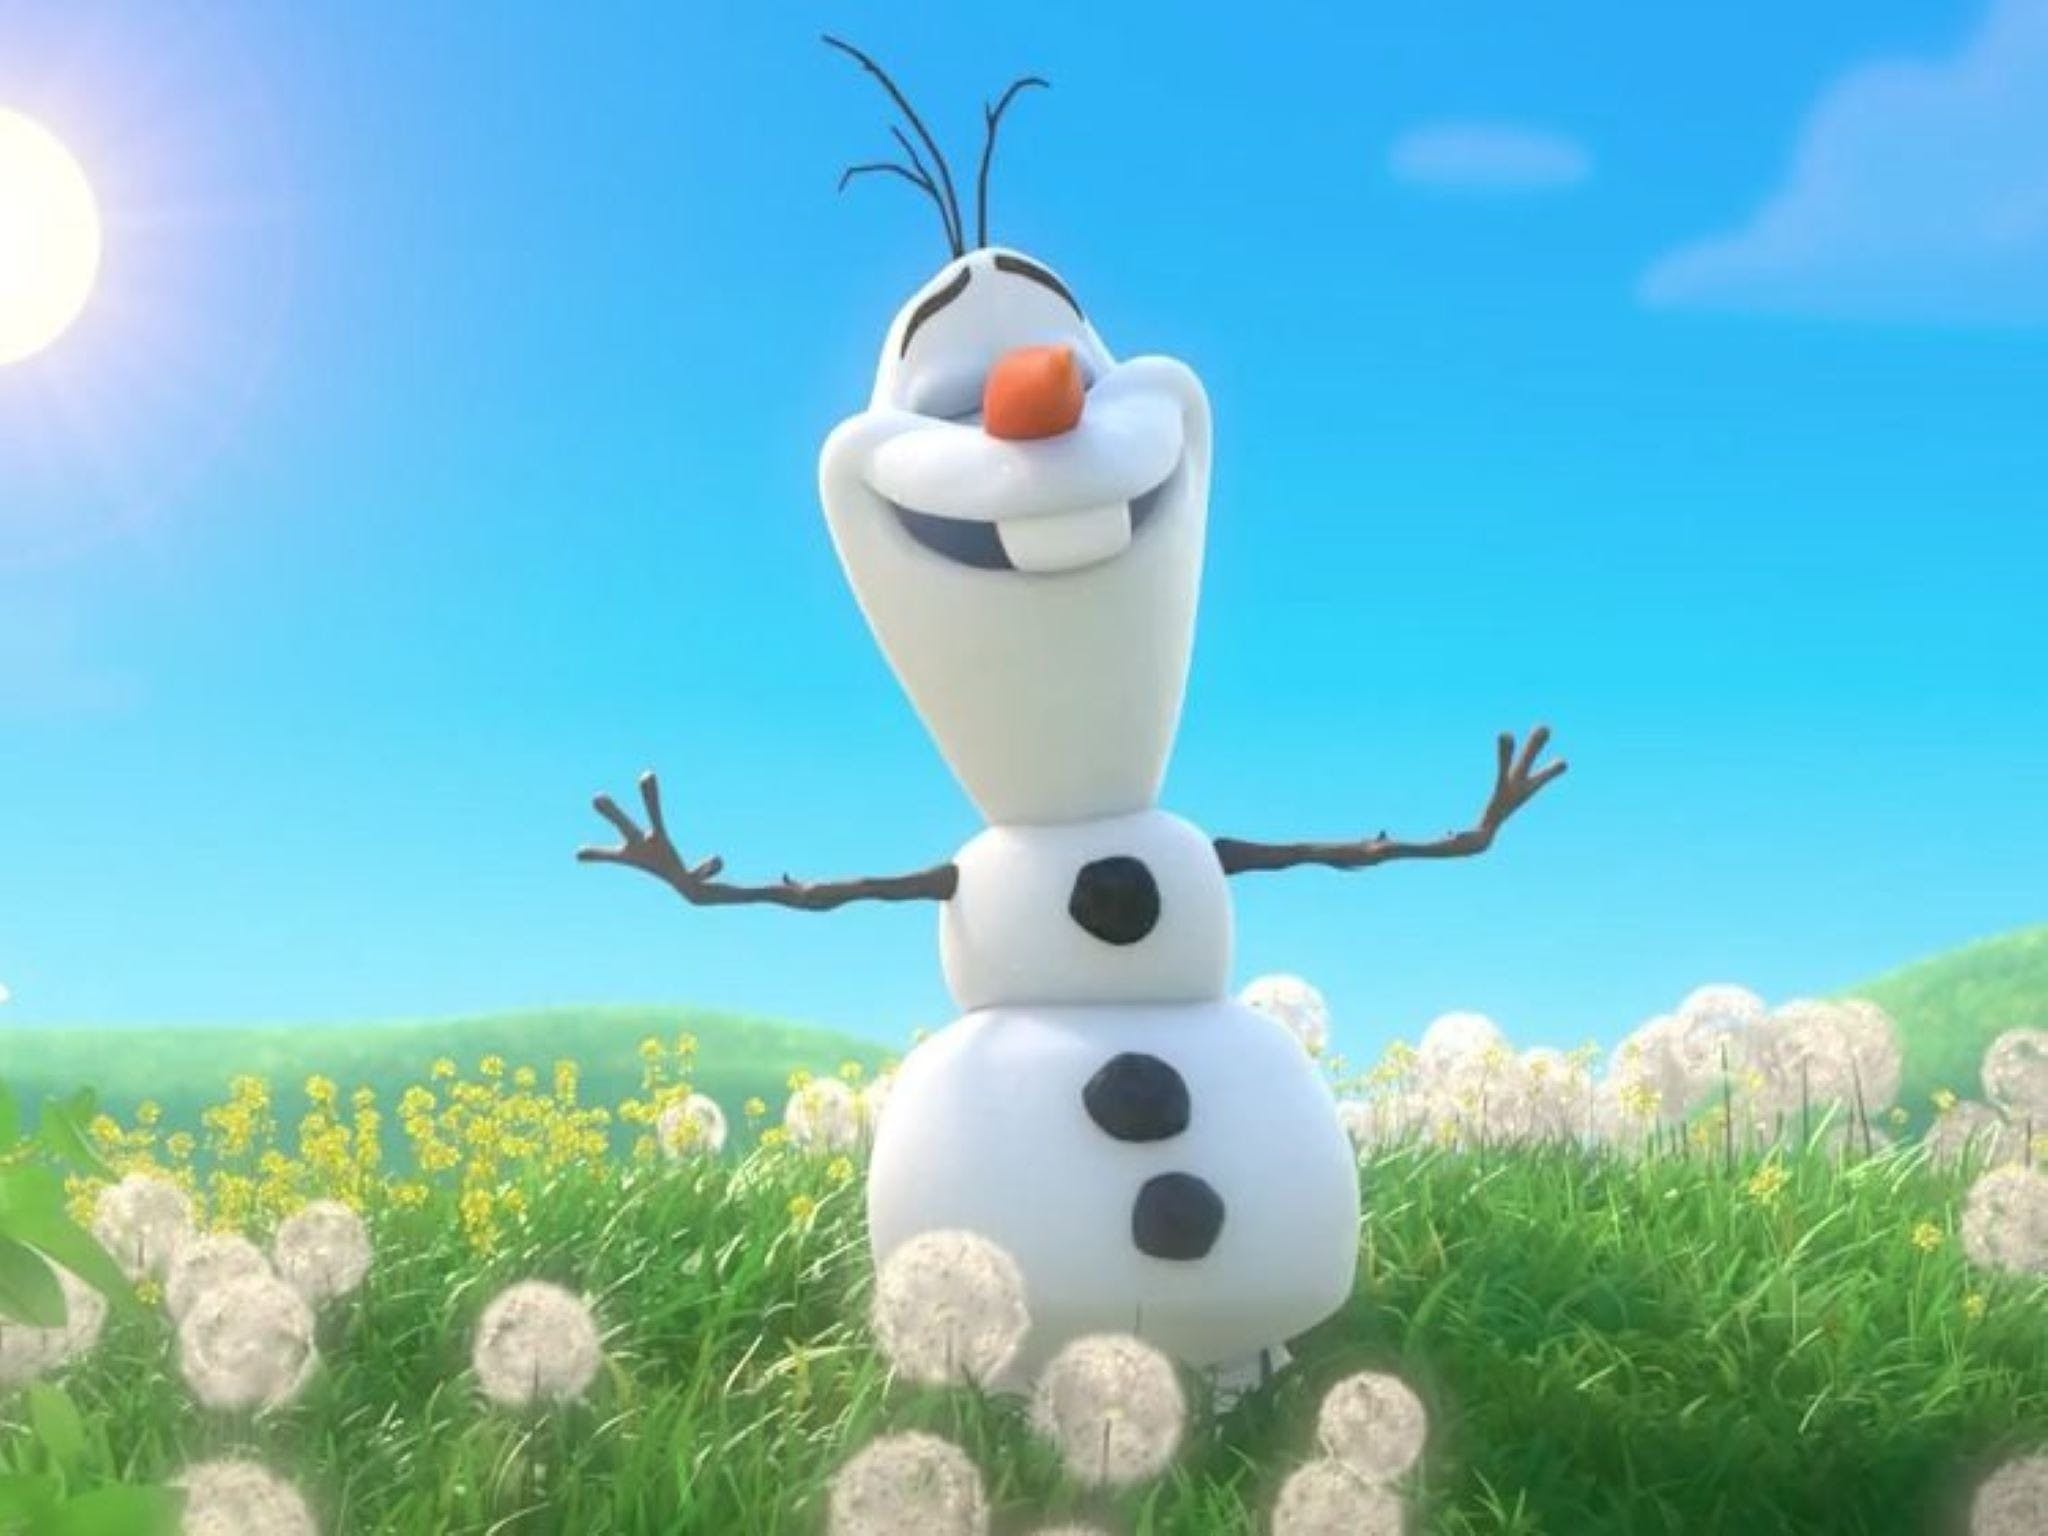 Meet Olaf from Frozen - Accommodation Bookings